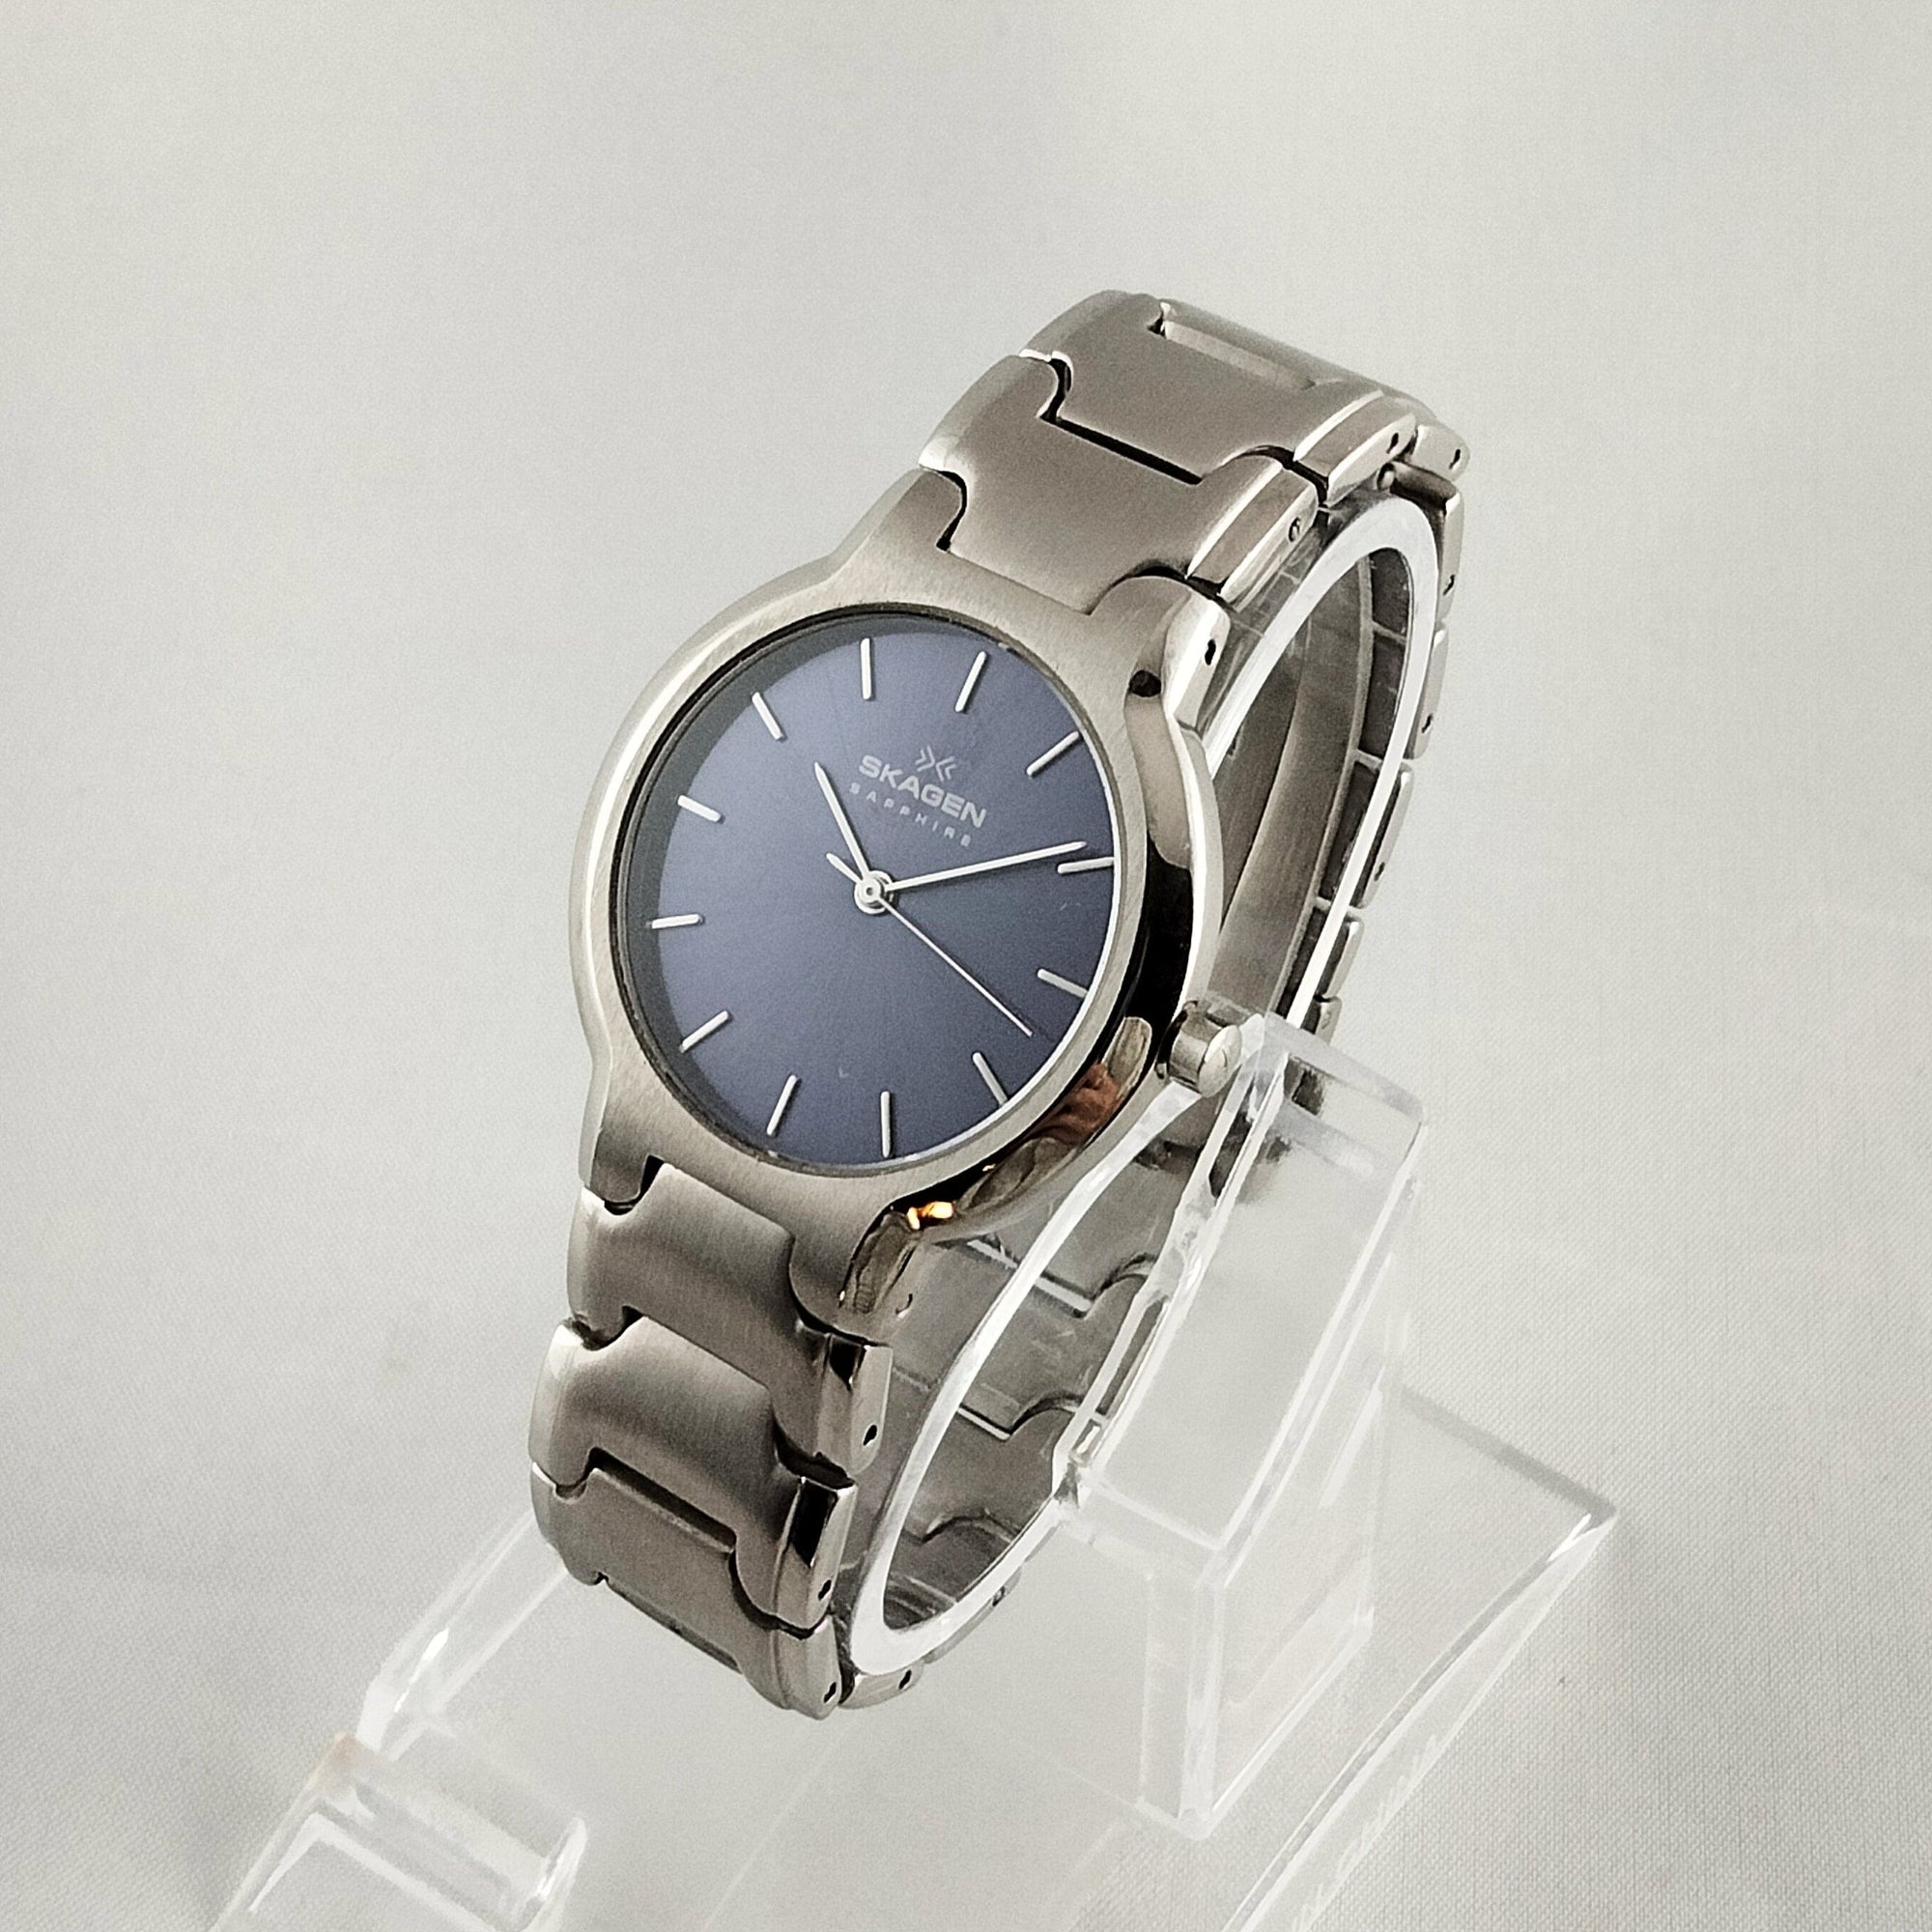 I Like Mikes Mid Century Modern Watches Skagen Stainless Steel Unisex Watch, Violet Dial, Bracelet Strap